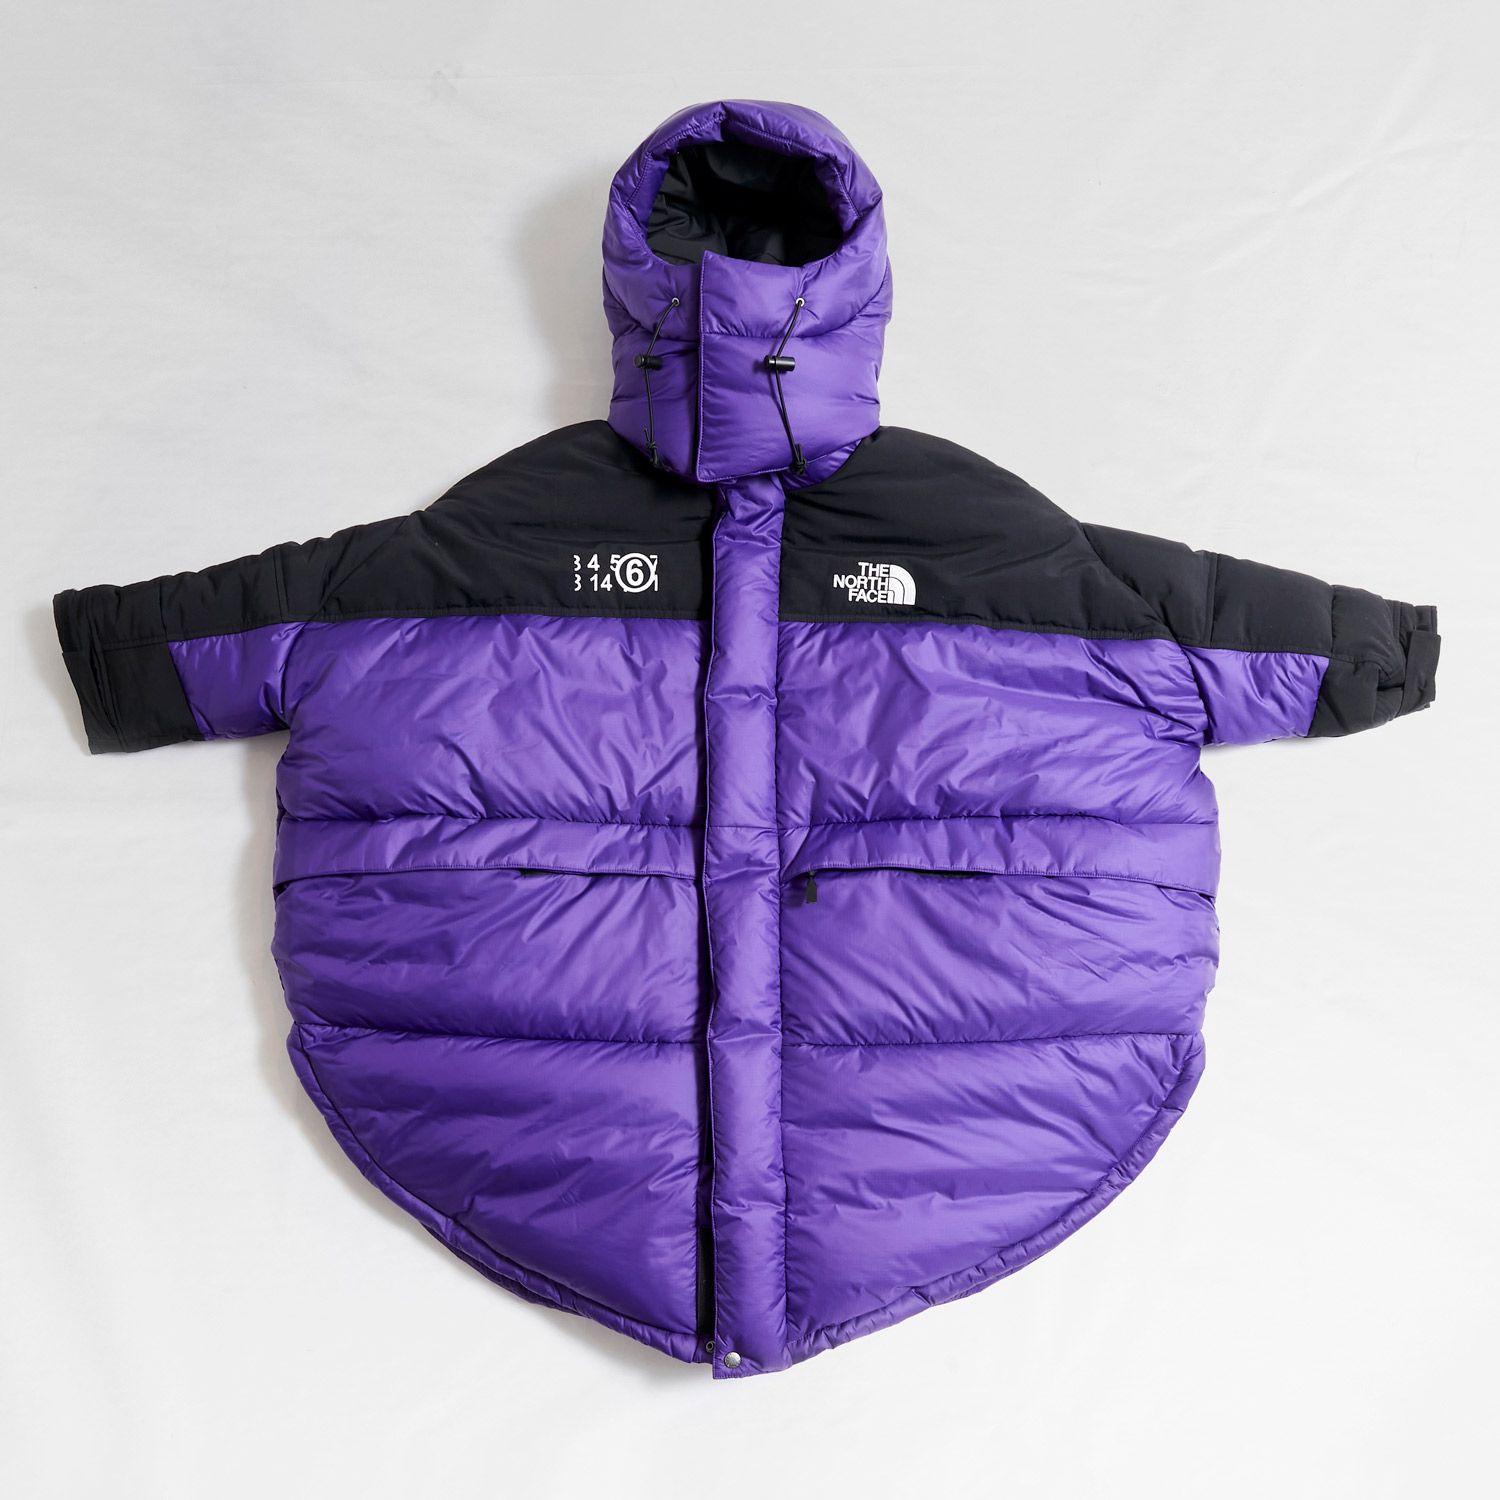 The MM6 x The North Face Collab is Dropping Next Week